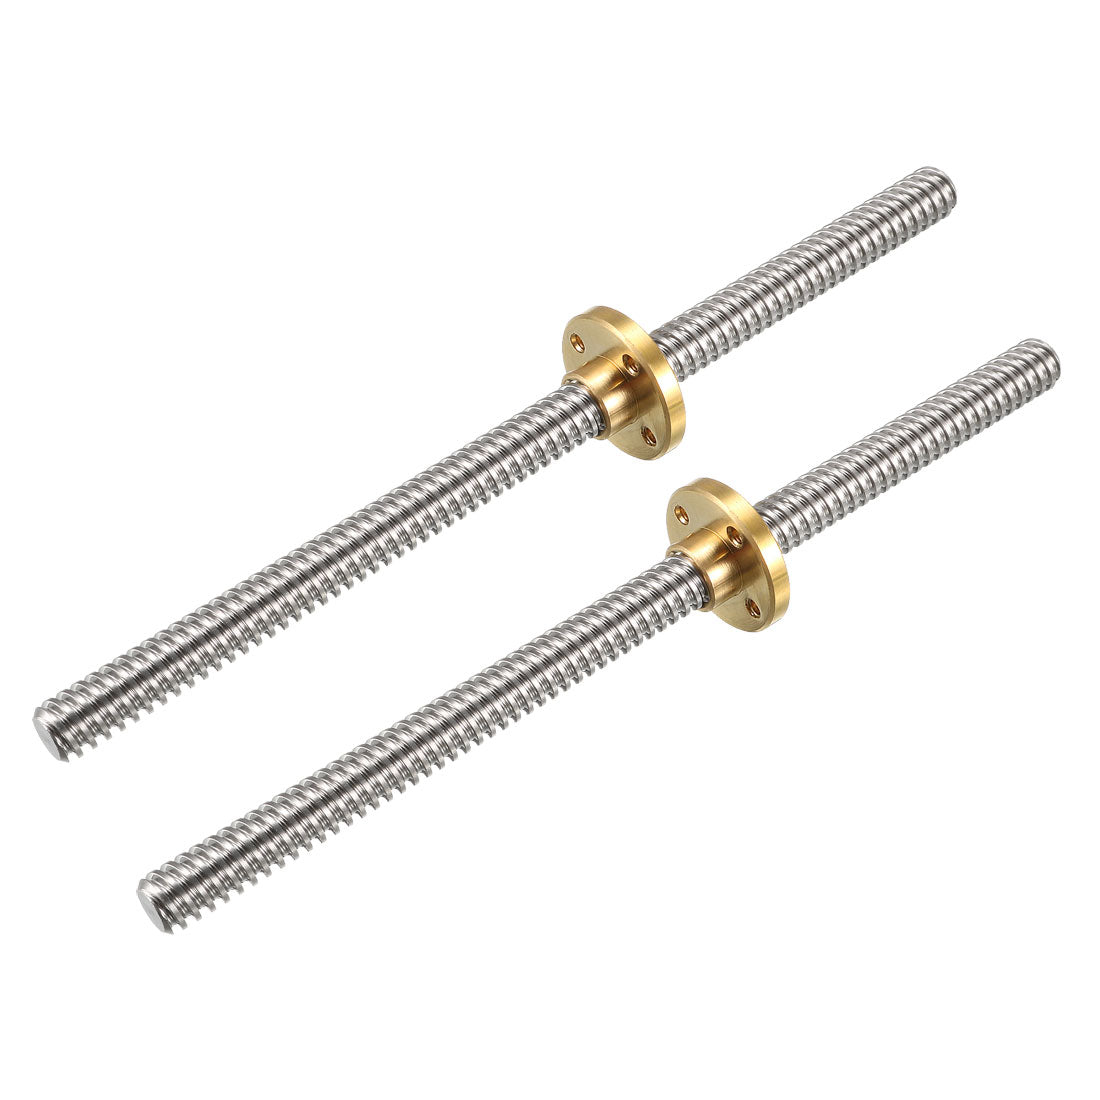 uxcell Uxcell 2PCS 150mm T8 Pitch 2mm Lead 2mm Lead Screw Rod with Copper Nut for 3D Printer